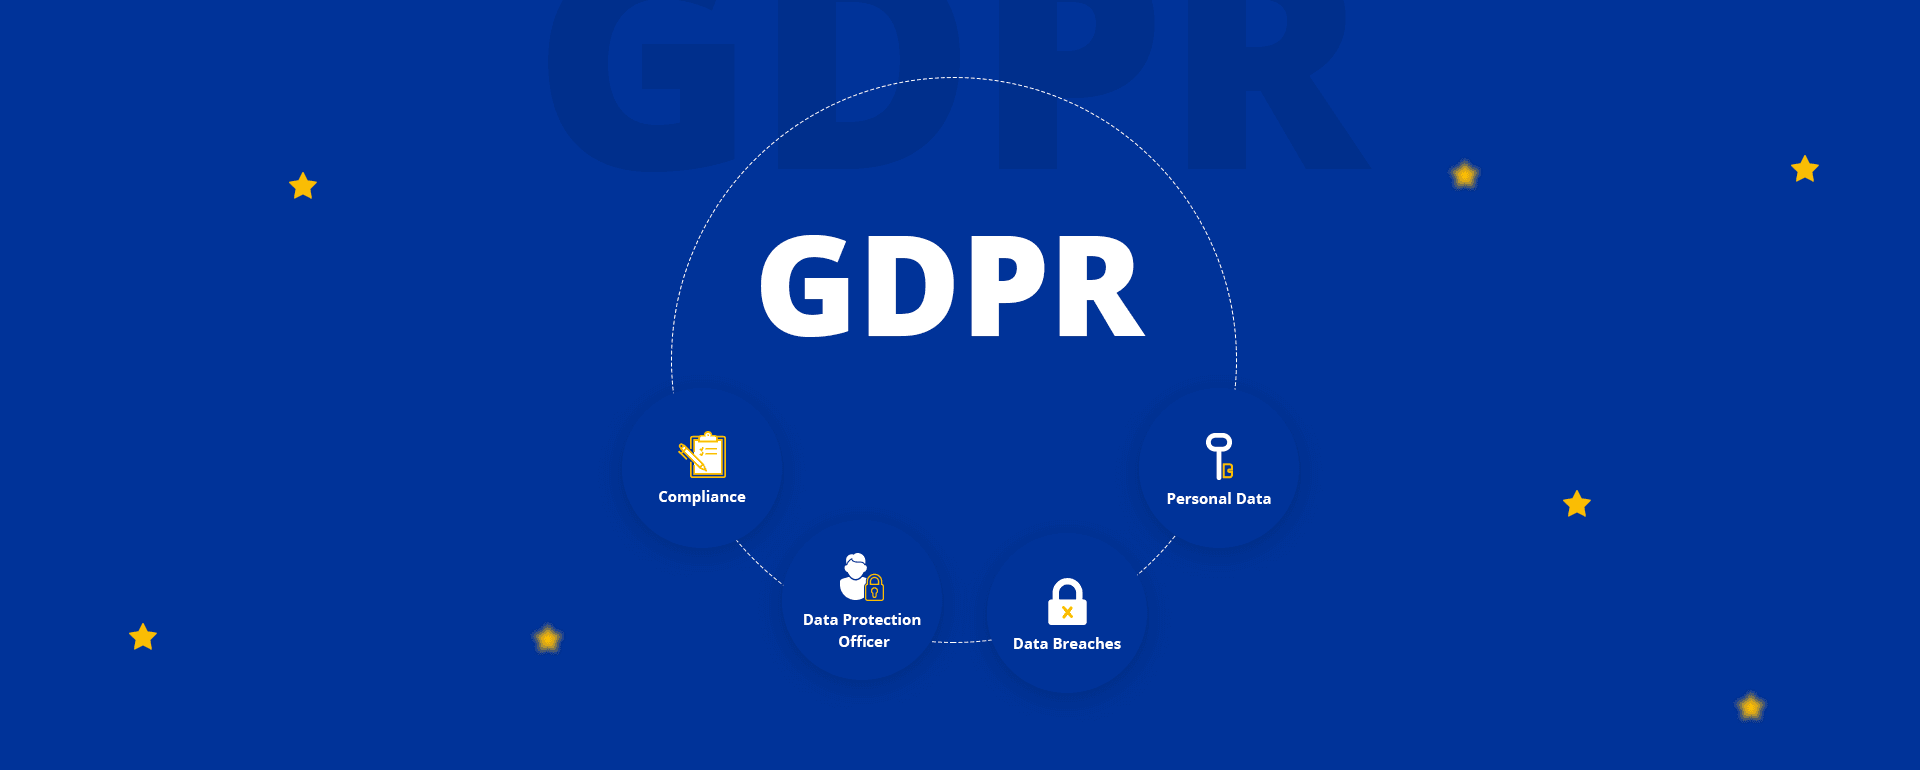 Make Sure Your Website Plays By the Rules: GDPR Compliance Checklist